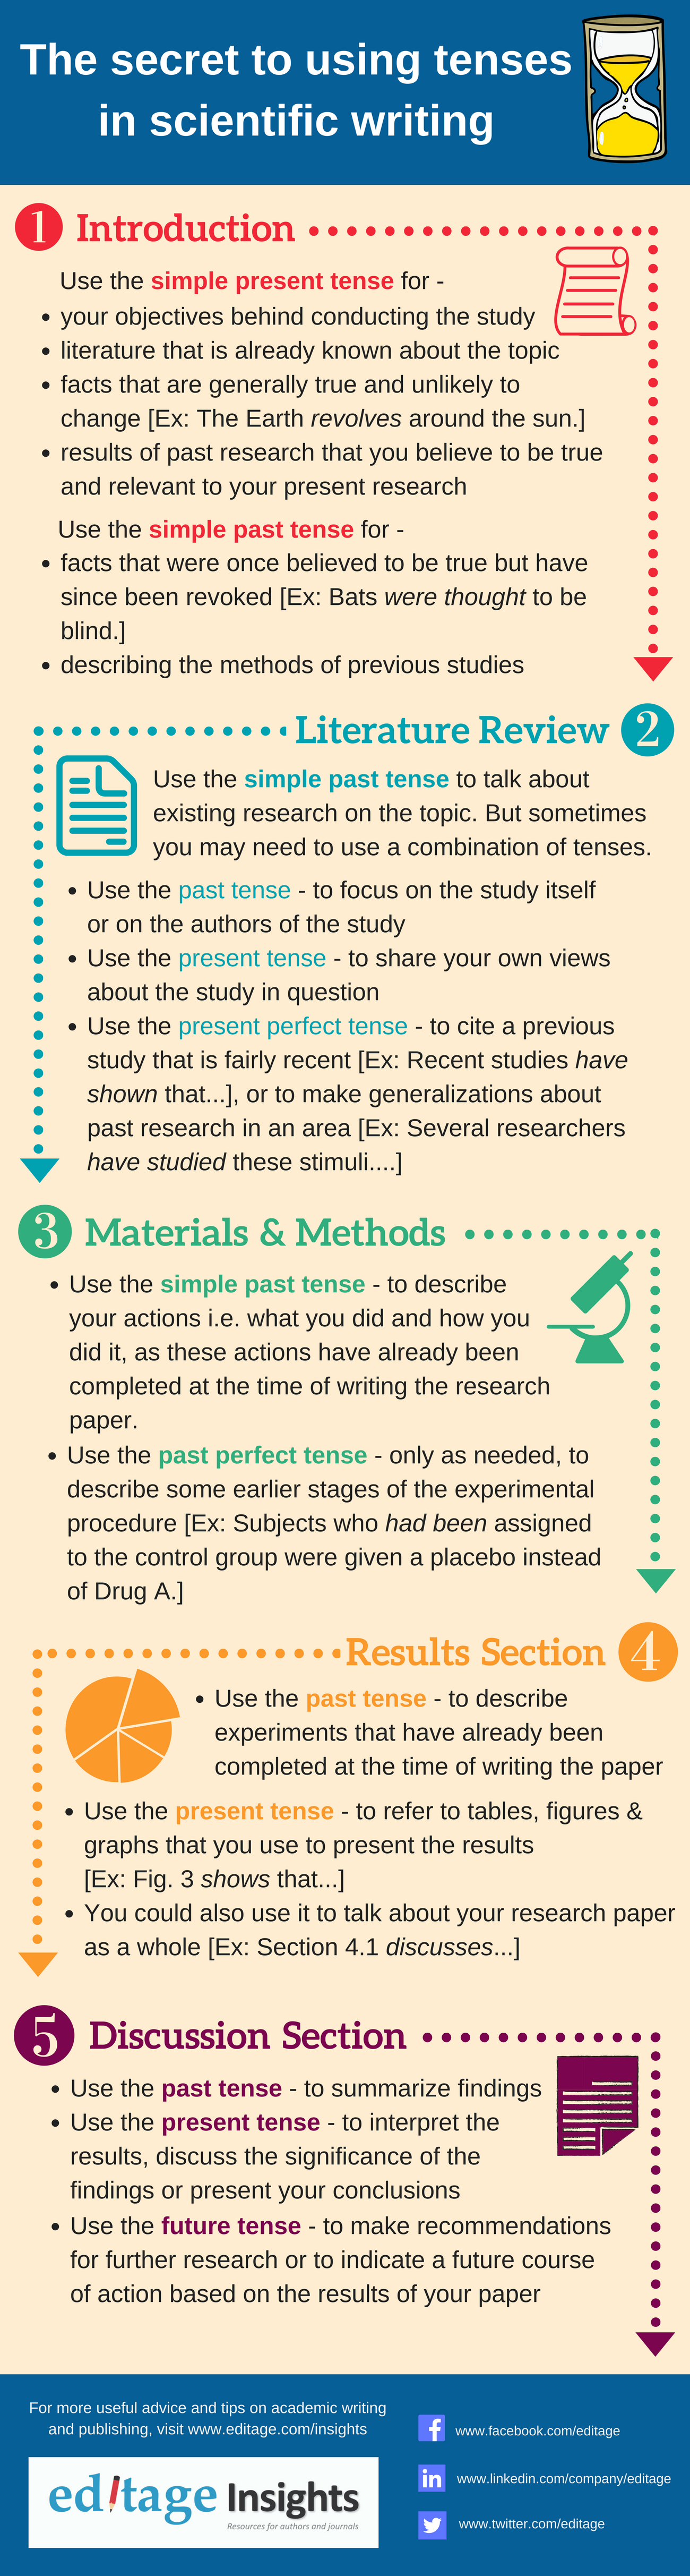 The secret to using tenses in scientific writing [Infographic]